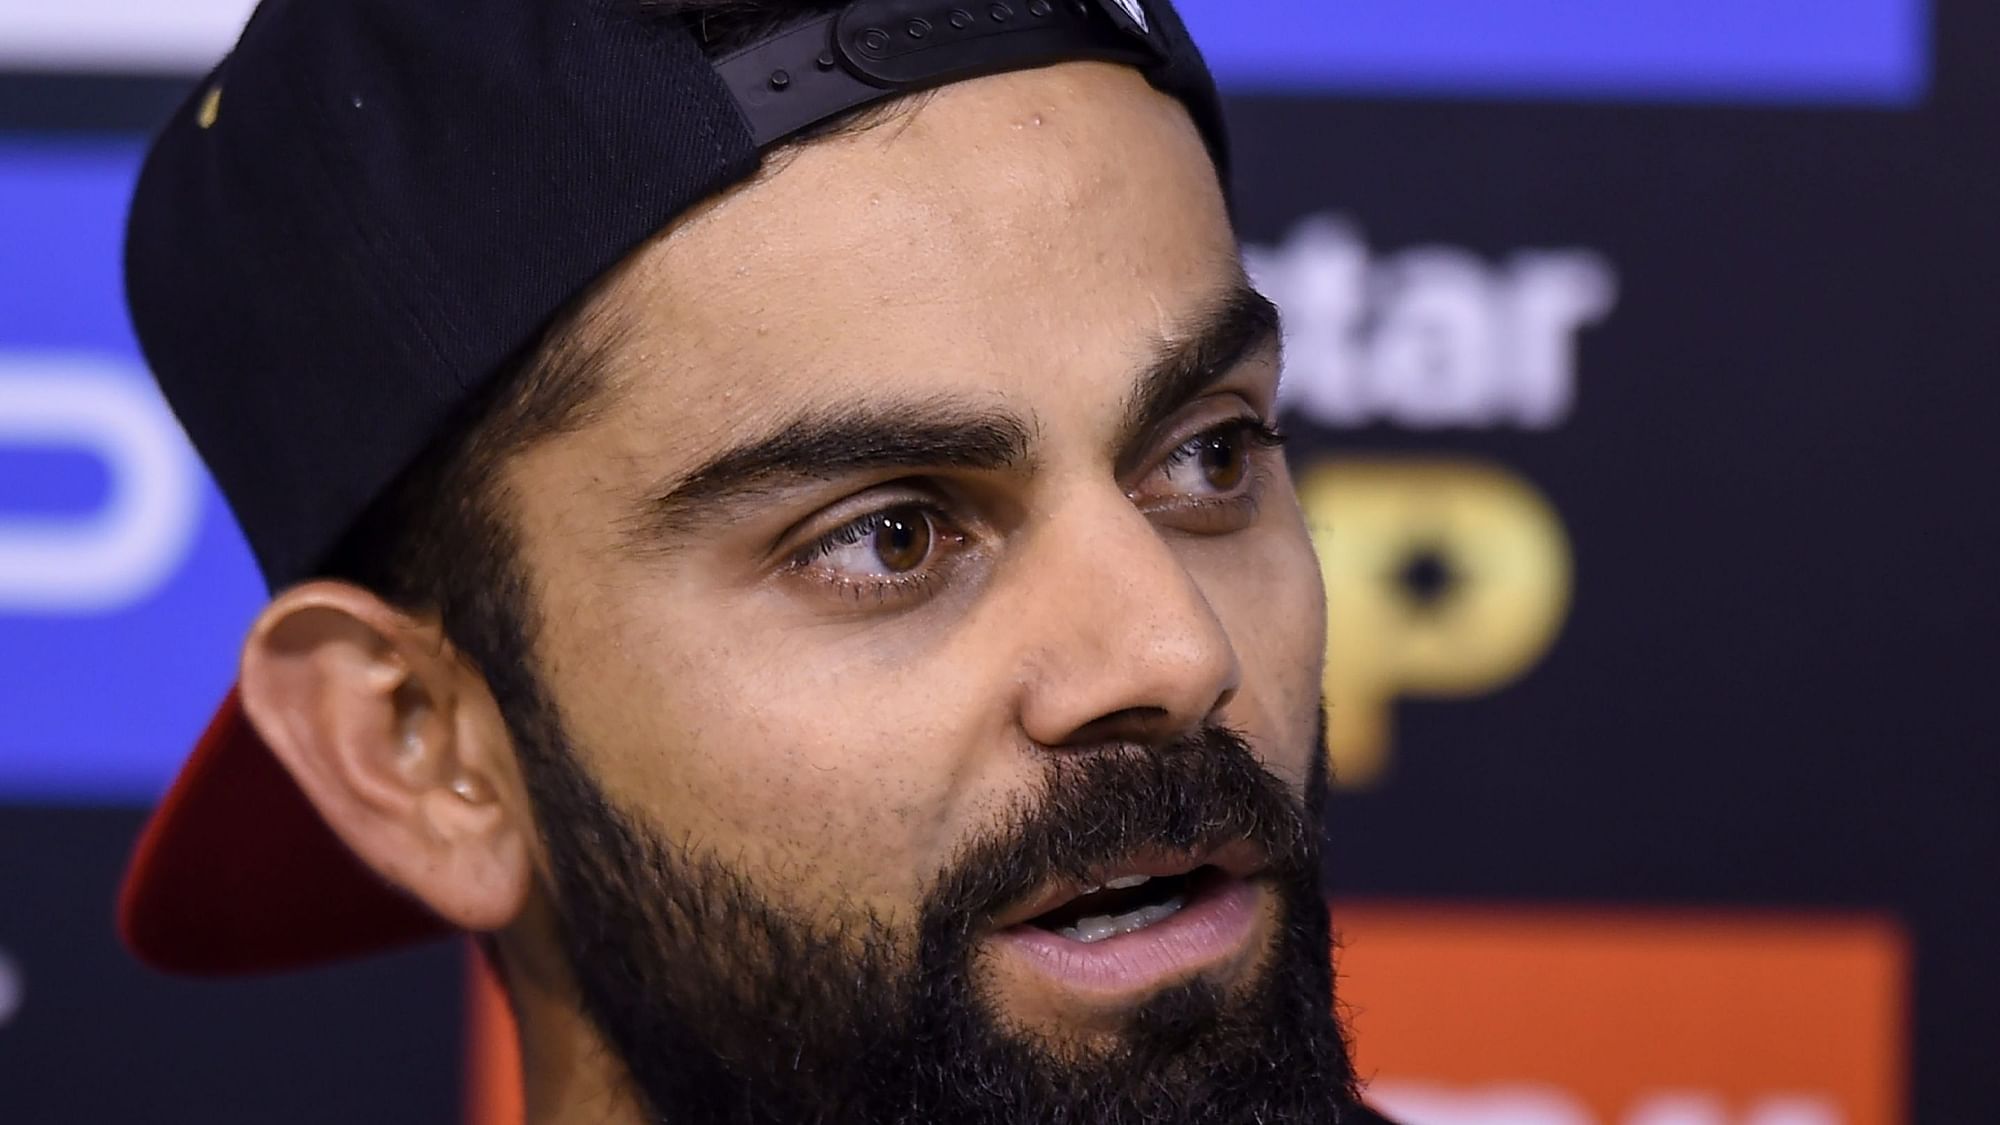 Virat Kohli was speaking on the eve of the Indian Premier League opener between his team Royal Challengers Bangalore and Chennai Super Kings.